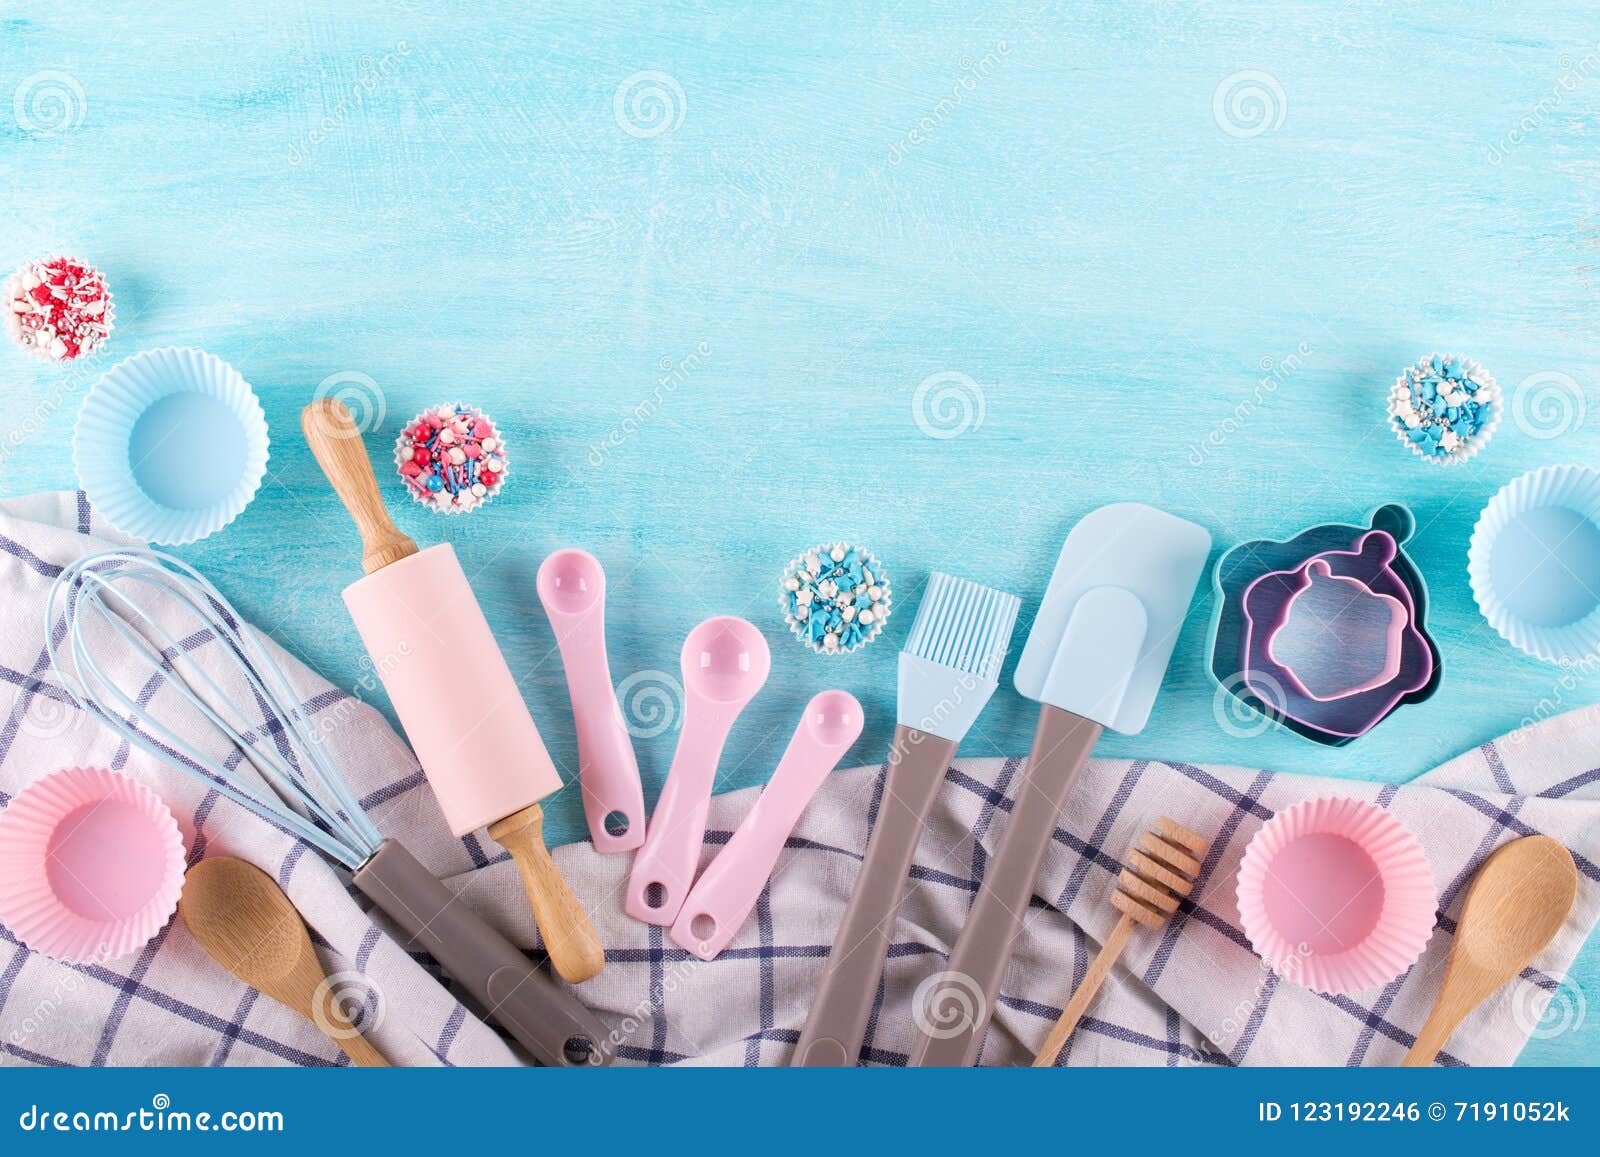 various kitchen baking utensils. flat lay. mockup for recipe on blue background.